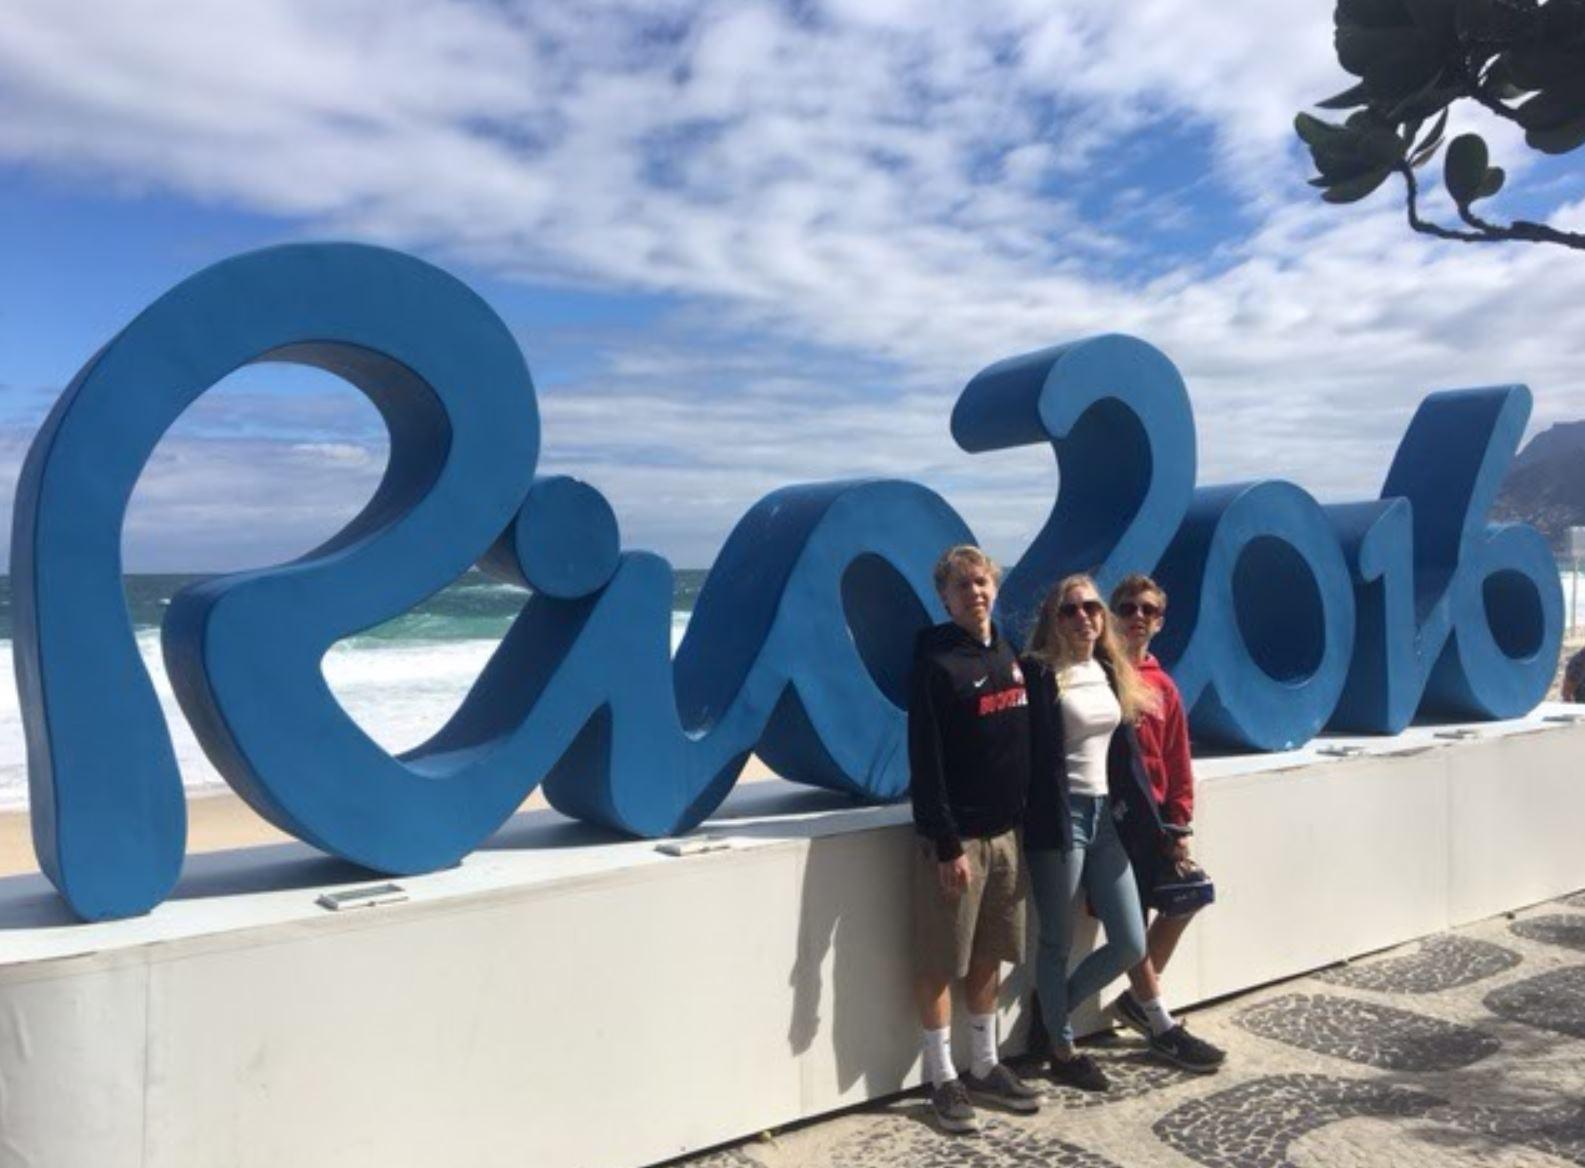 CHEERING ON TEAM USA: Wade Munger '18, Sarah Munger '19 and Caleb Munger '21 (from left) stand in front of the Rio 2016 sign in Rio, Brazil where the 2016 Summer Olympics took place. The Mungers supported Team USA in the stands as various teams won gold throughout the games. Munger stated, "Although many different countries were there cheering on their teams, there definitely was a sense of national pride for Team USA at every event."